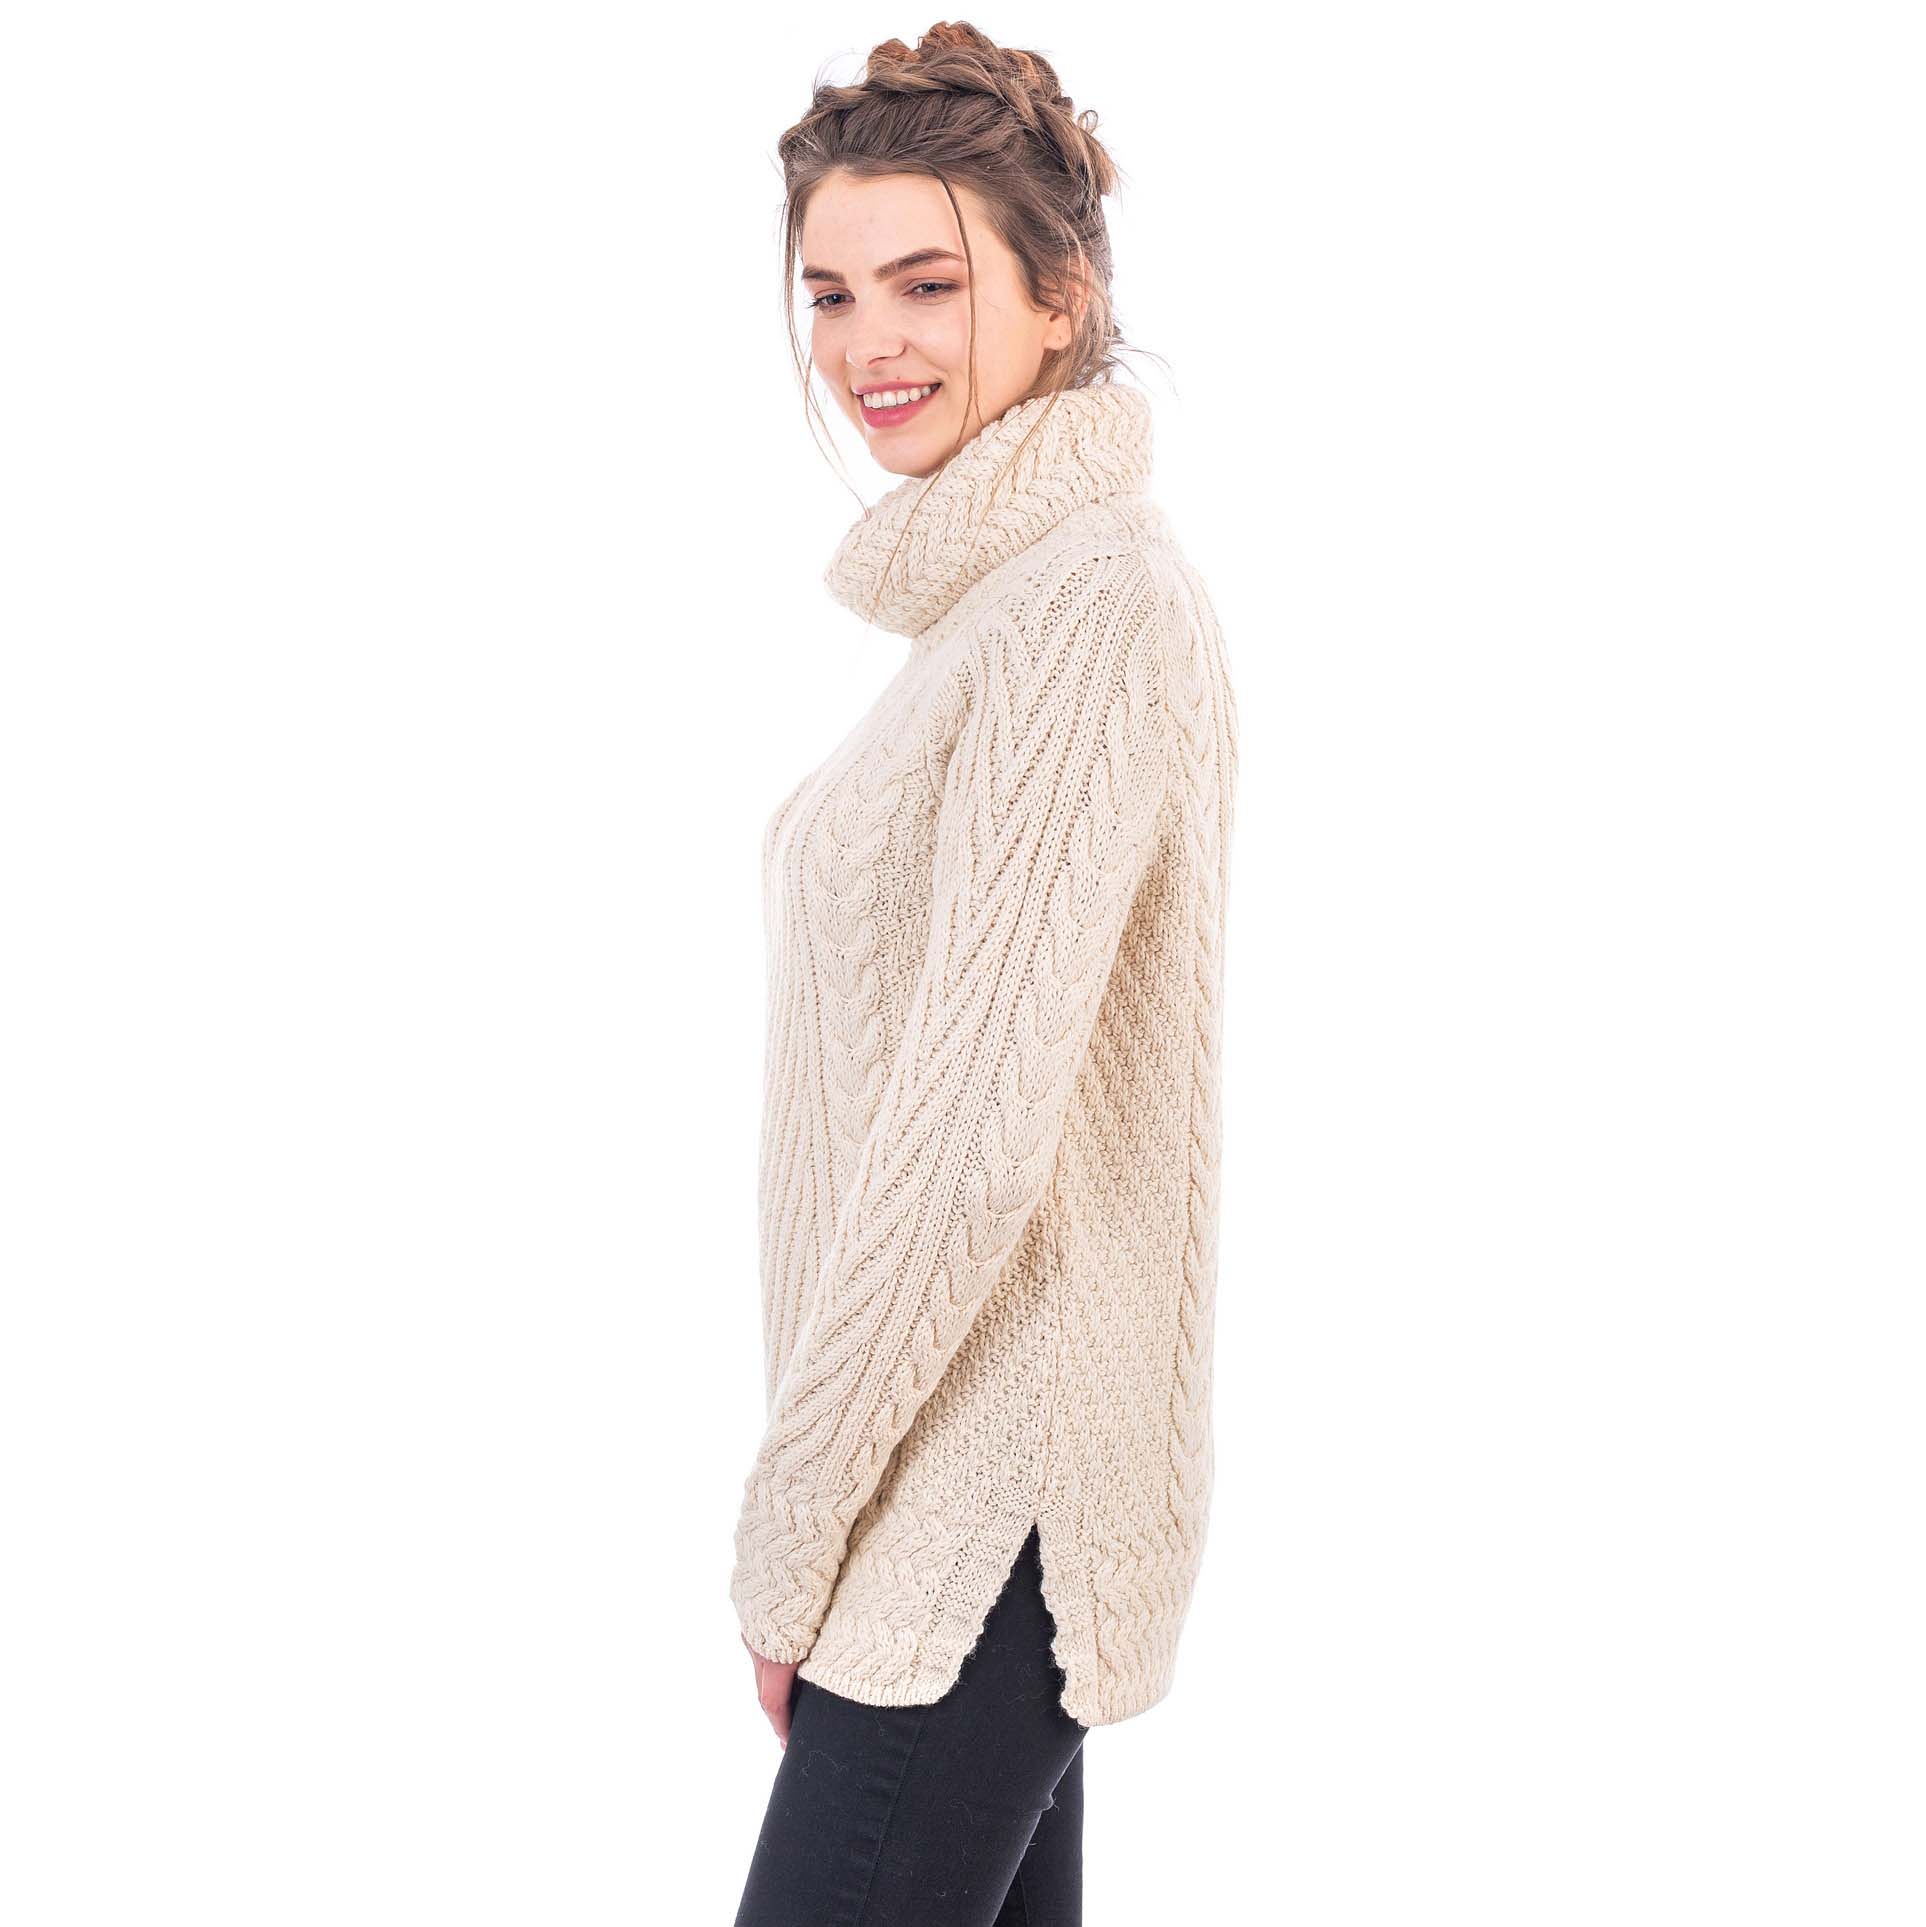 Product image for Irish Sweater | Ribbed Cable Knit Turtleneck Ladies Sweater